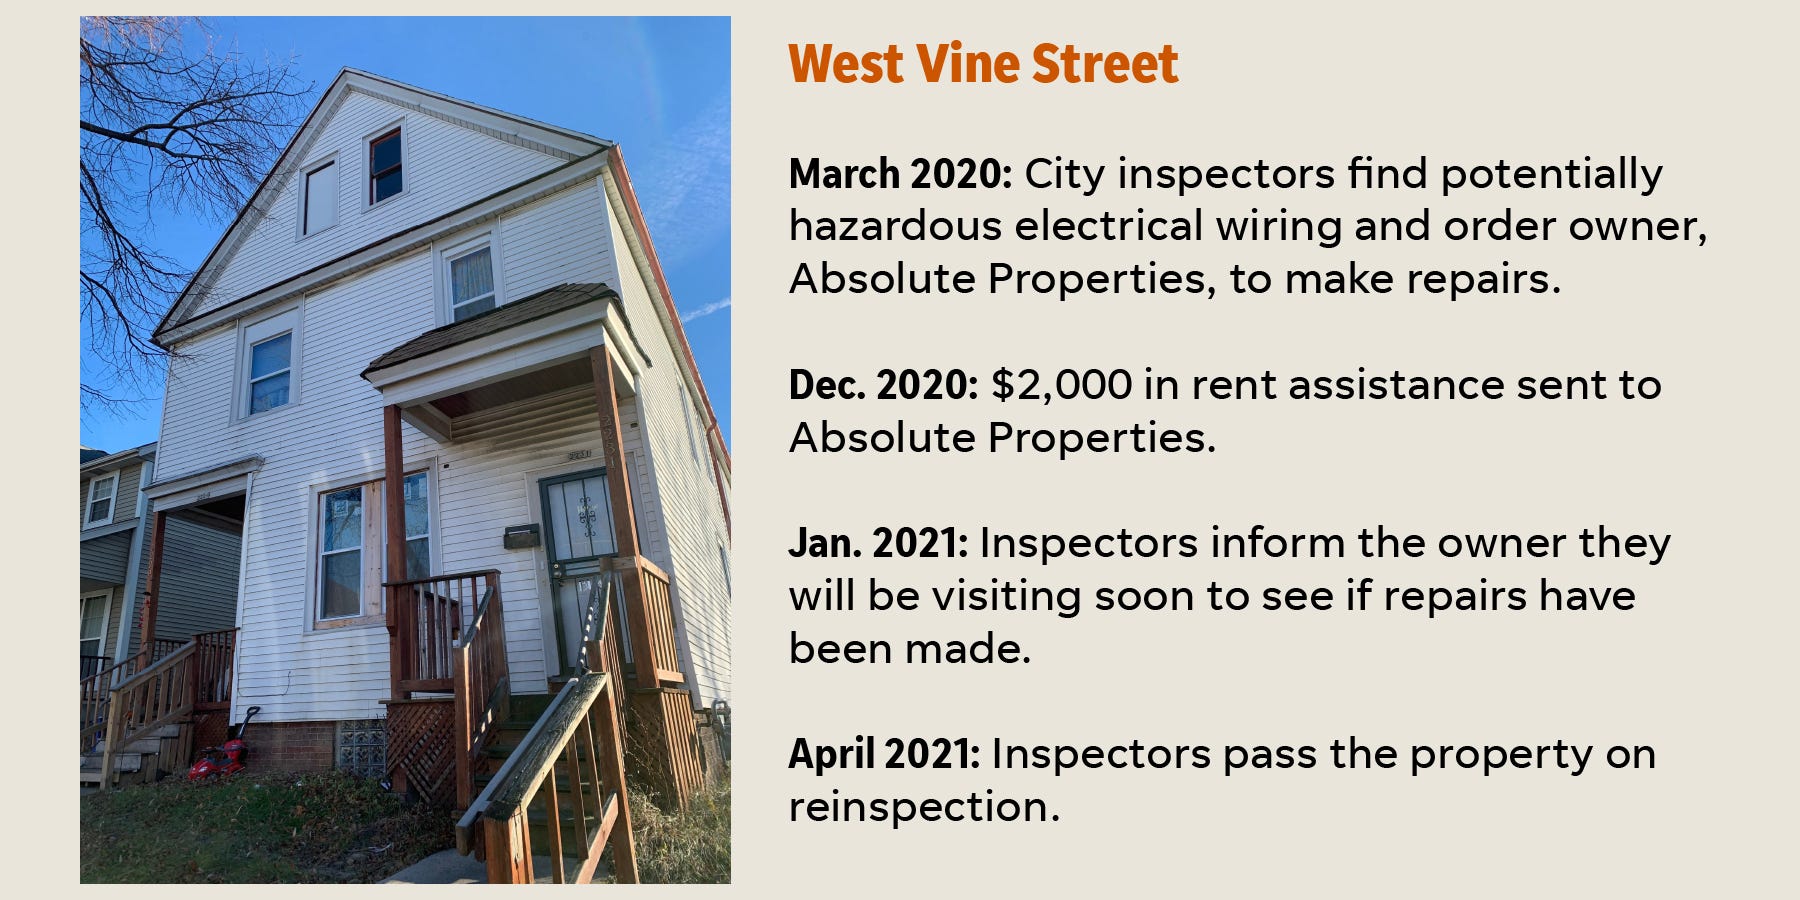 West Vine Street property card for wires and fires.